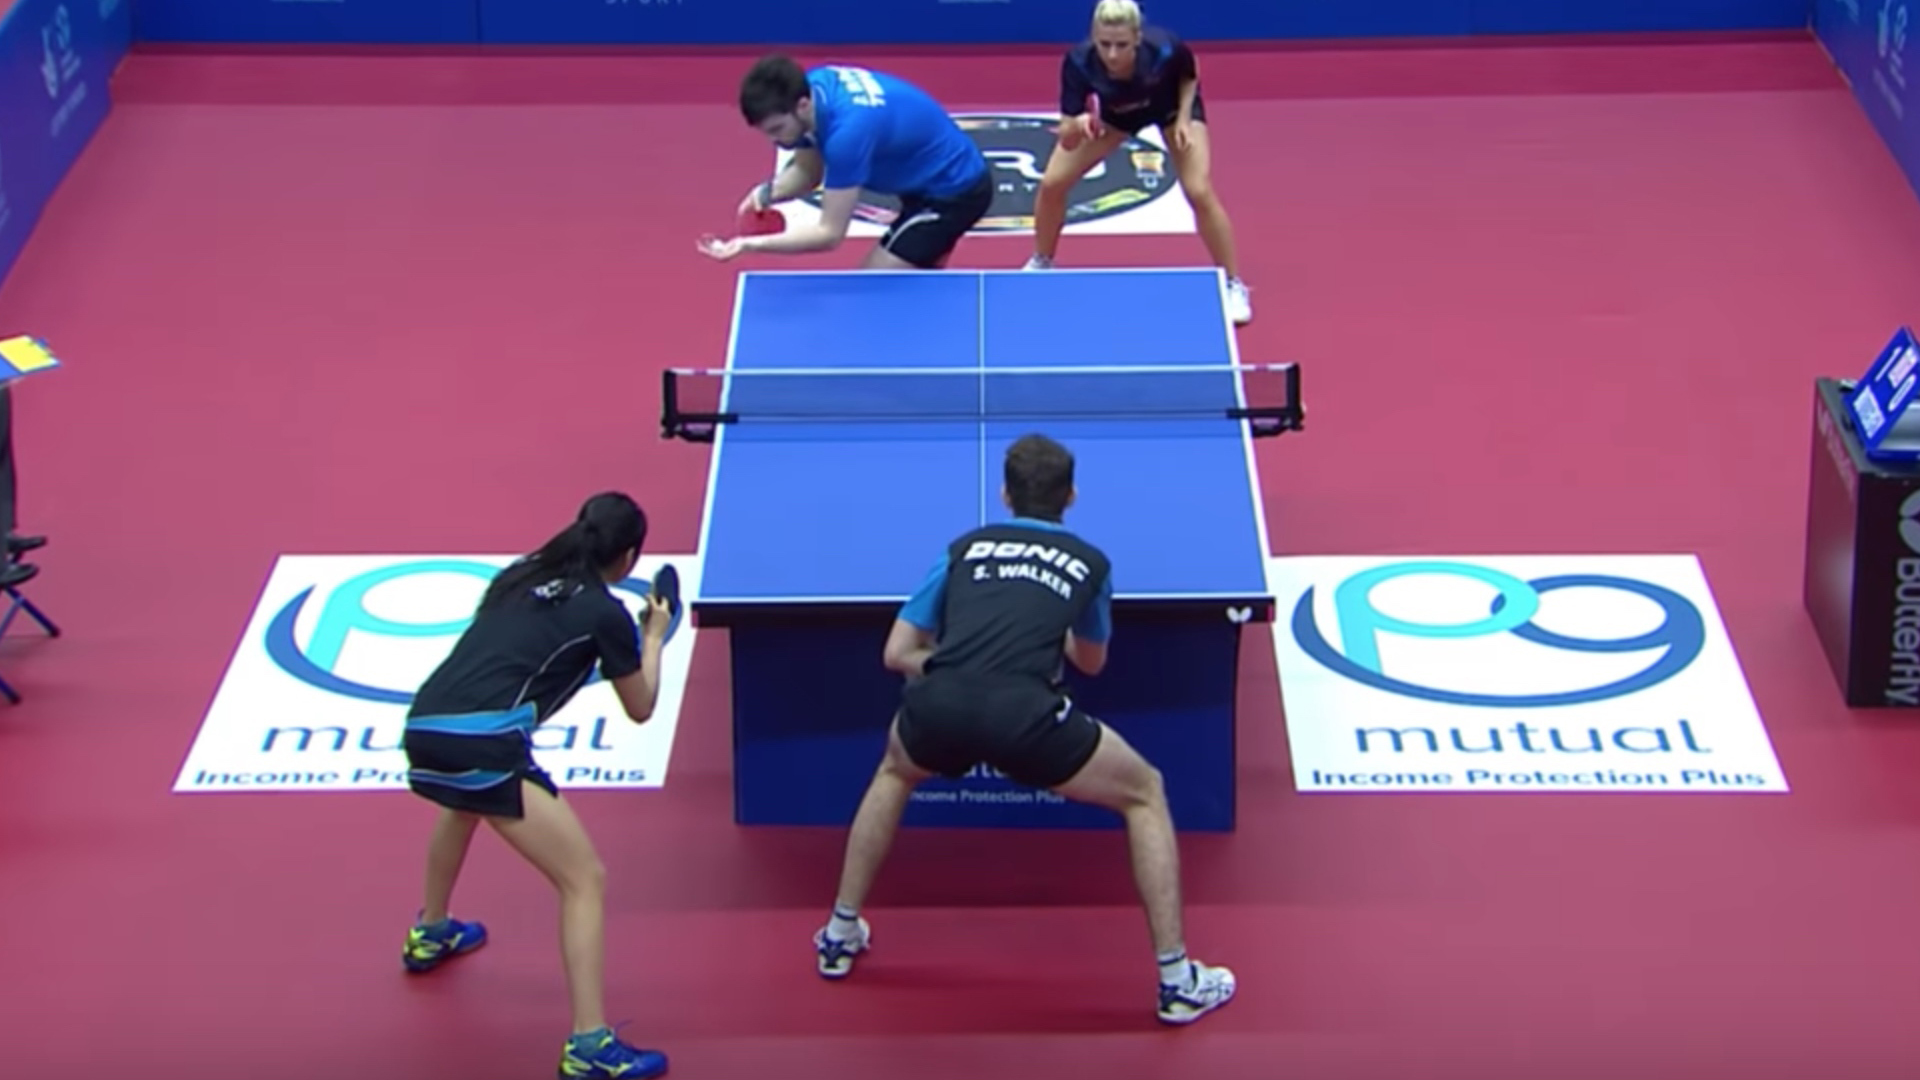 Types of hits in ping pong